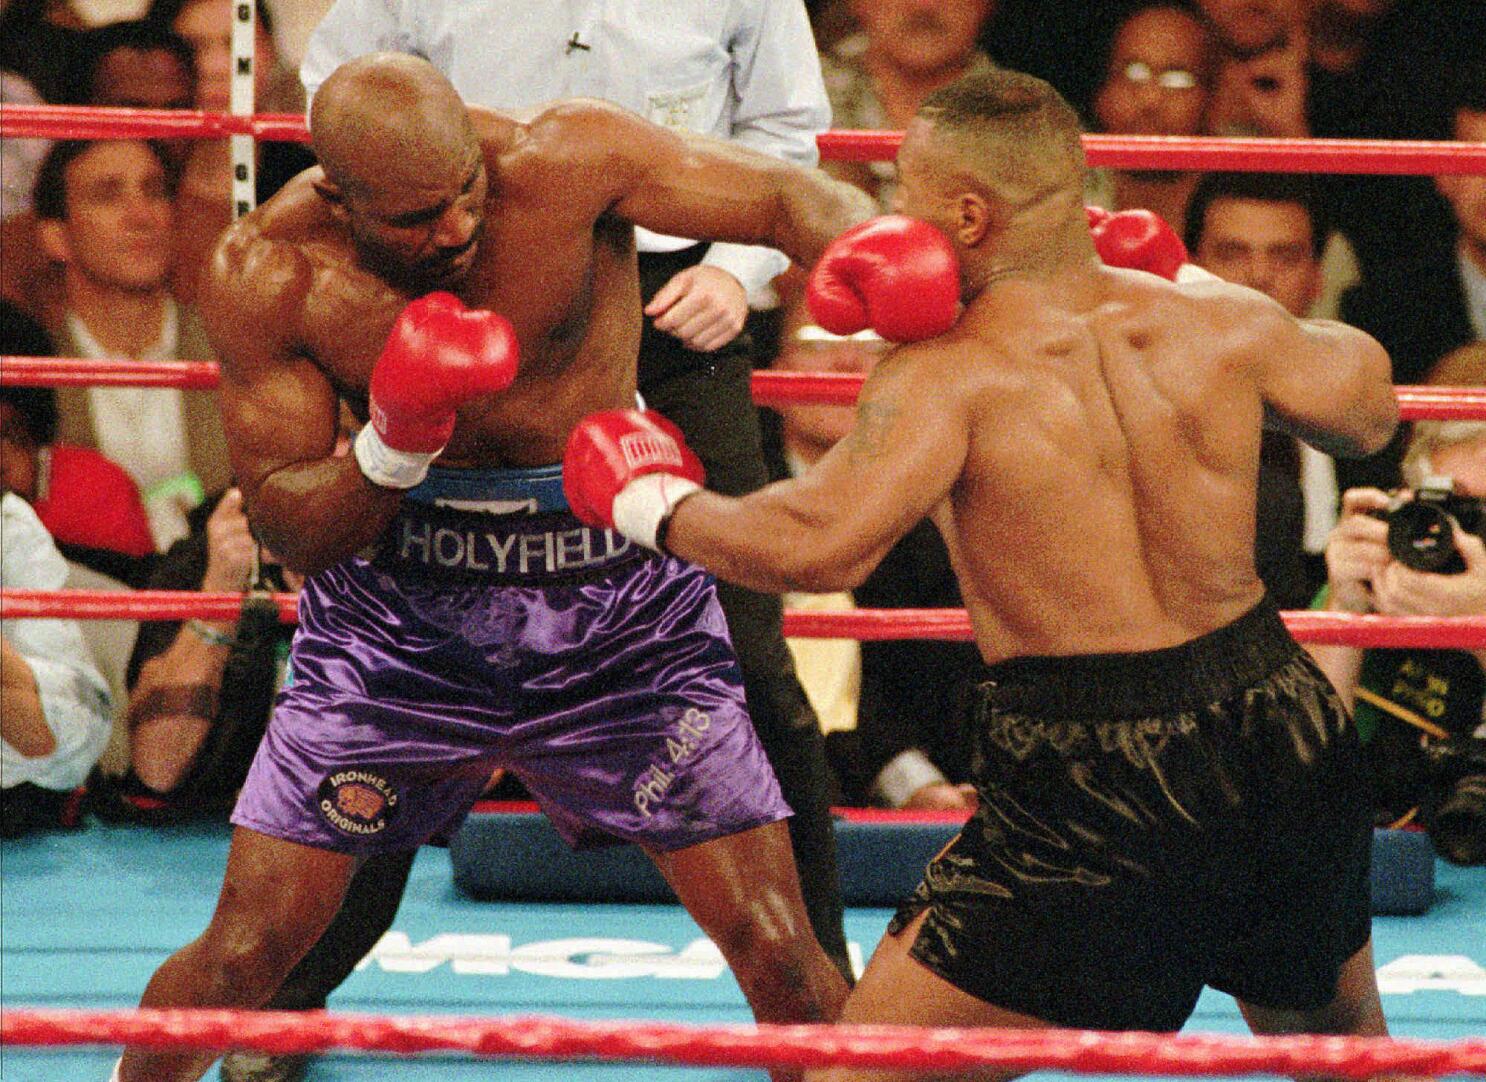 Mike Tyson's most infamous moment comes alive in new book, 'The